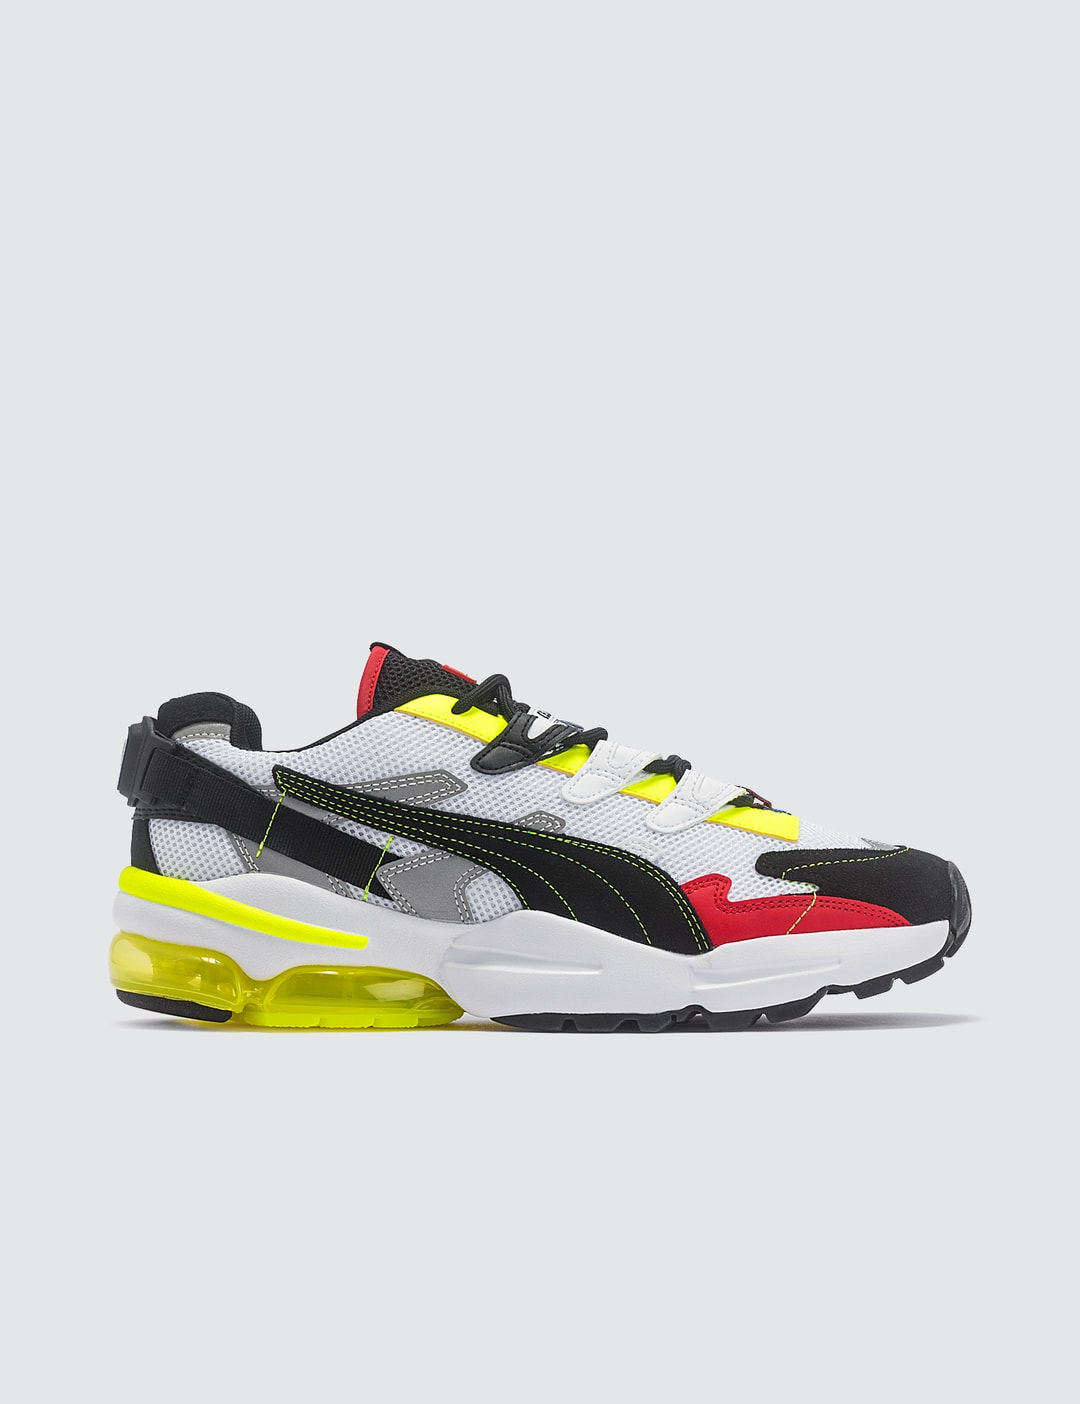 herwinnen puur vocaal Puma - Ader Error X Puma Cell Alien Sneakers | HBX - Globally Curated  Fashion and Lifestyle by Hypebeast